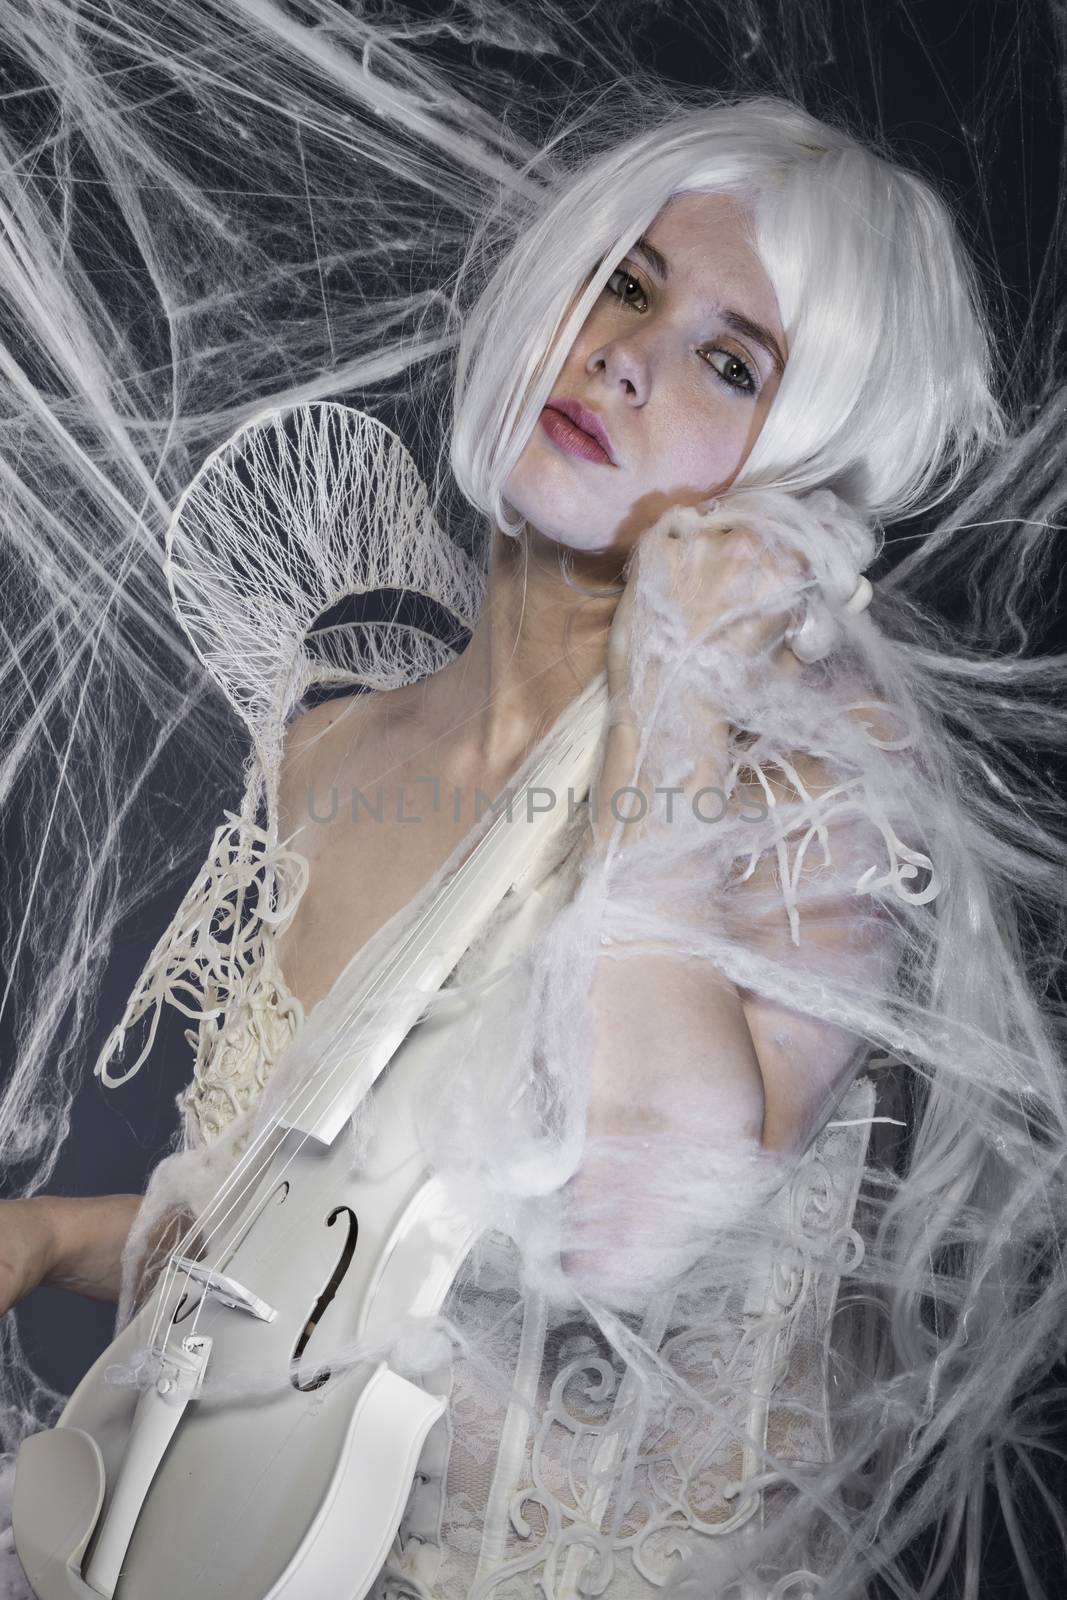 beautiful woman with couture gown in white, violin, music concep by FernandoCortes